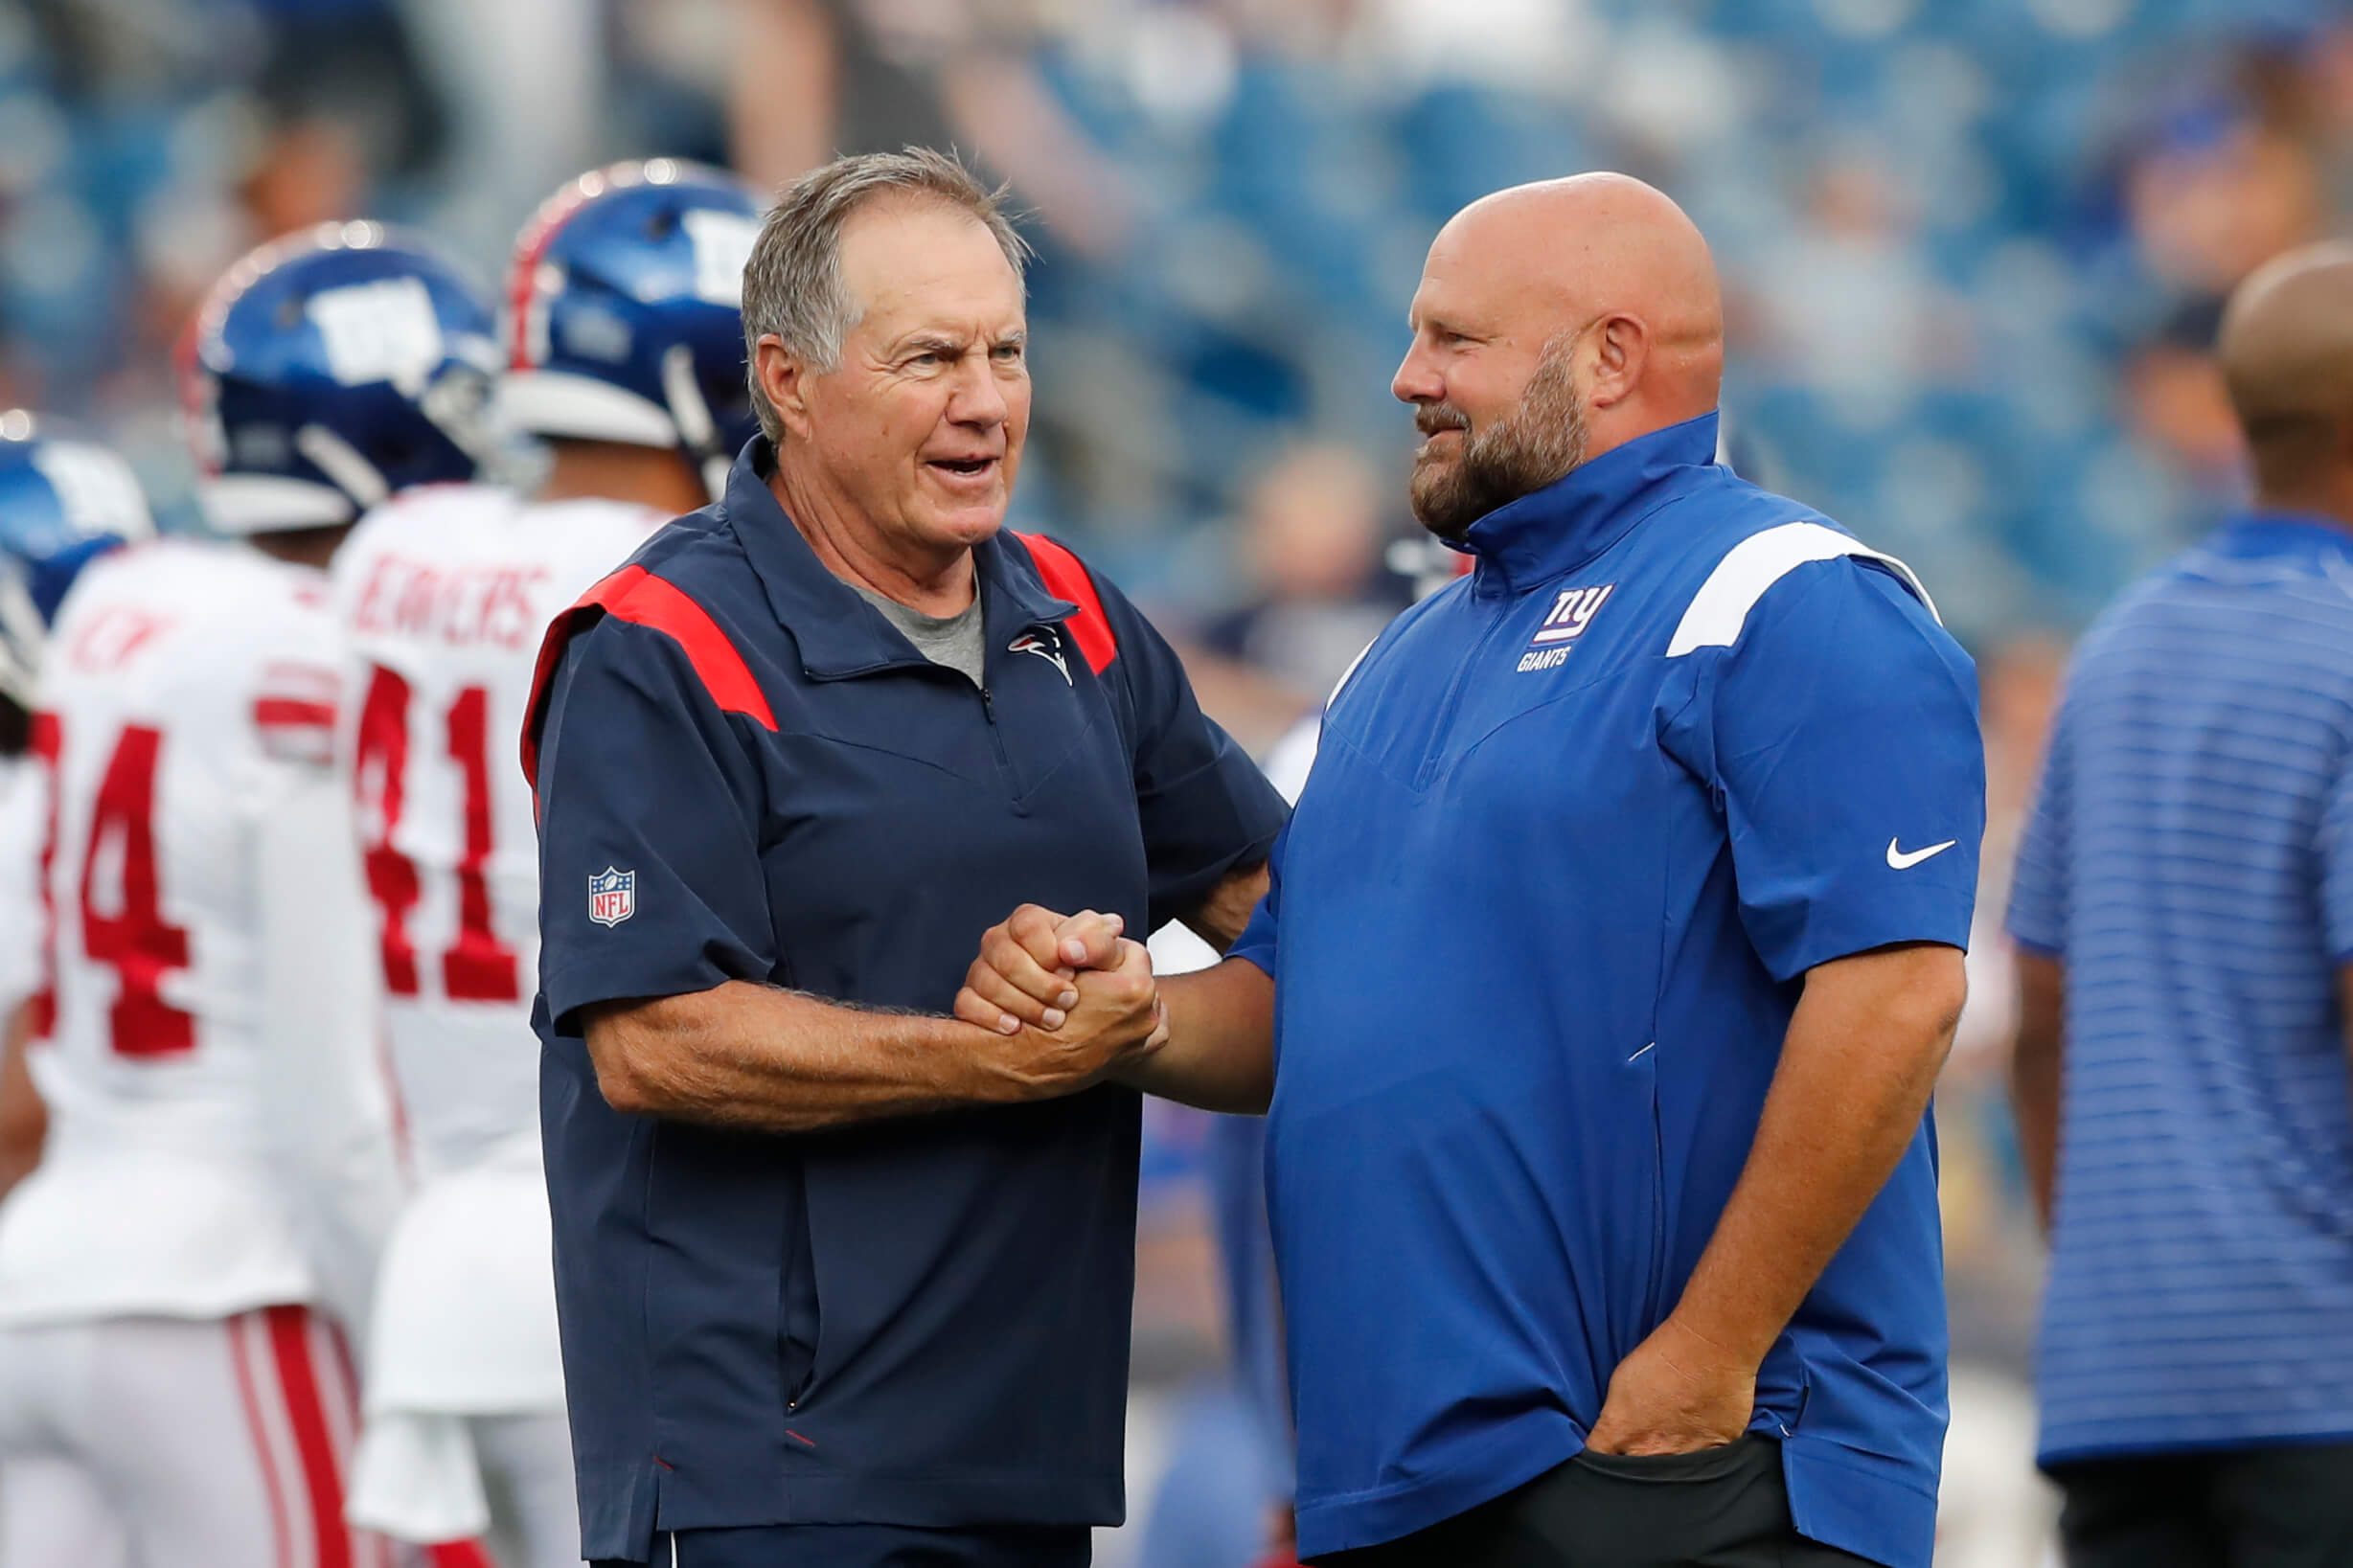 5 takeaways from Giants 23-21 win over Patriots in first preseason game